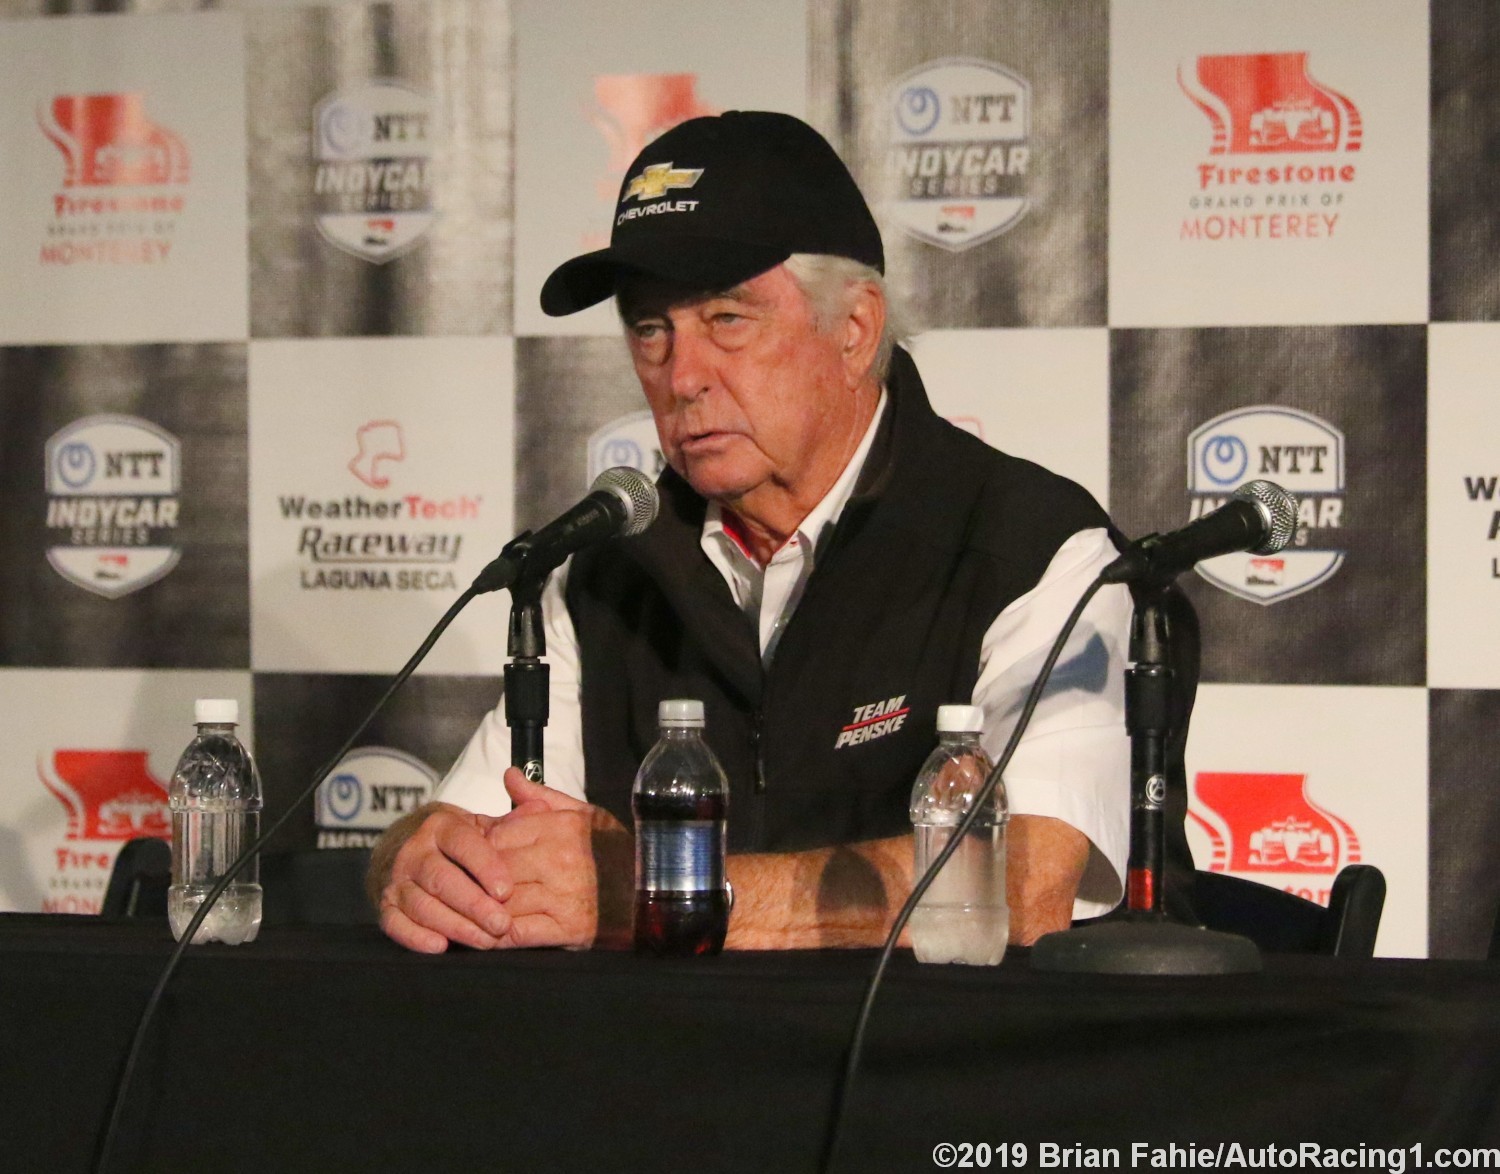 Roger Penske's team wins the Indy 500 and finishes 1-2 in the championship